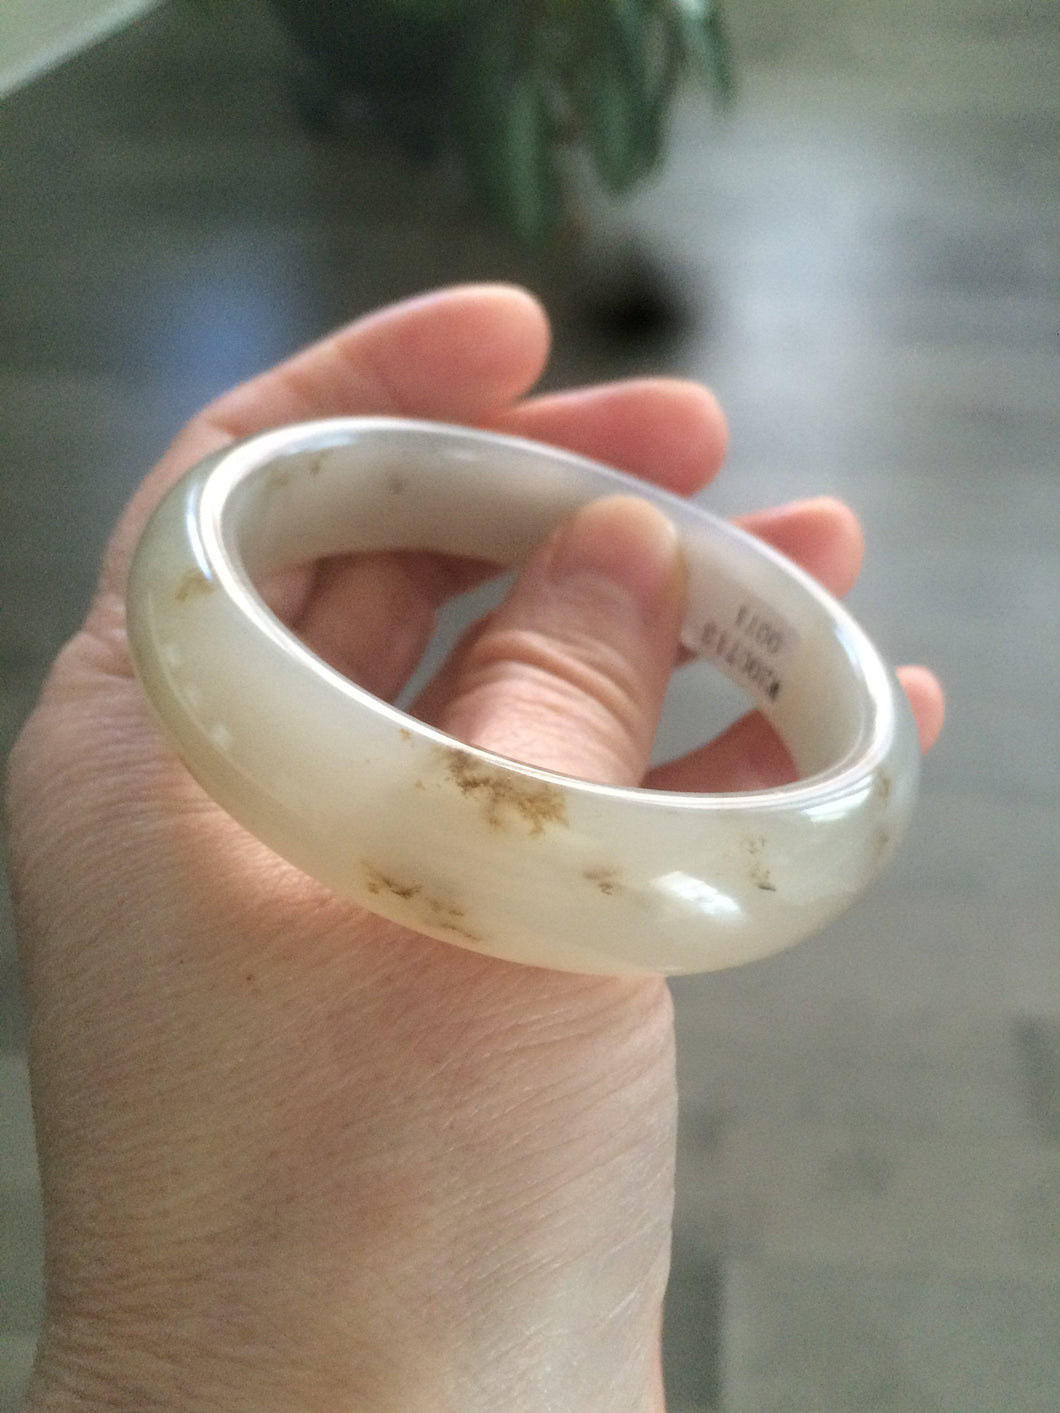 Sale! Certified 53.4mm 100% Natural icy white with brown floating dandelions nephrite Hetian Jade bangle R29-0071